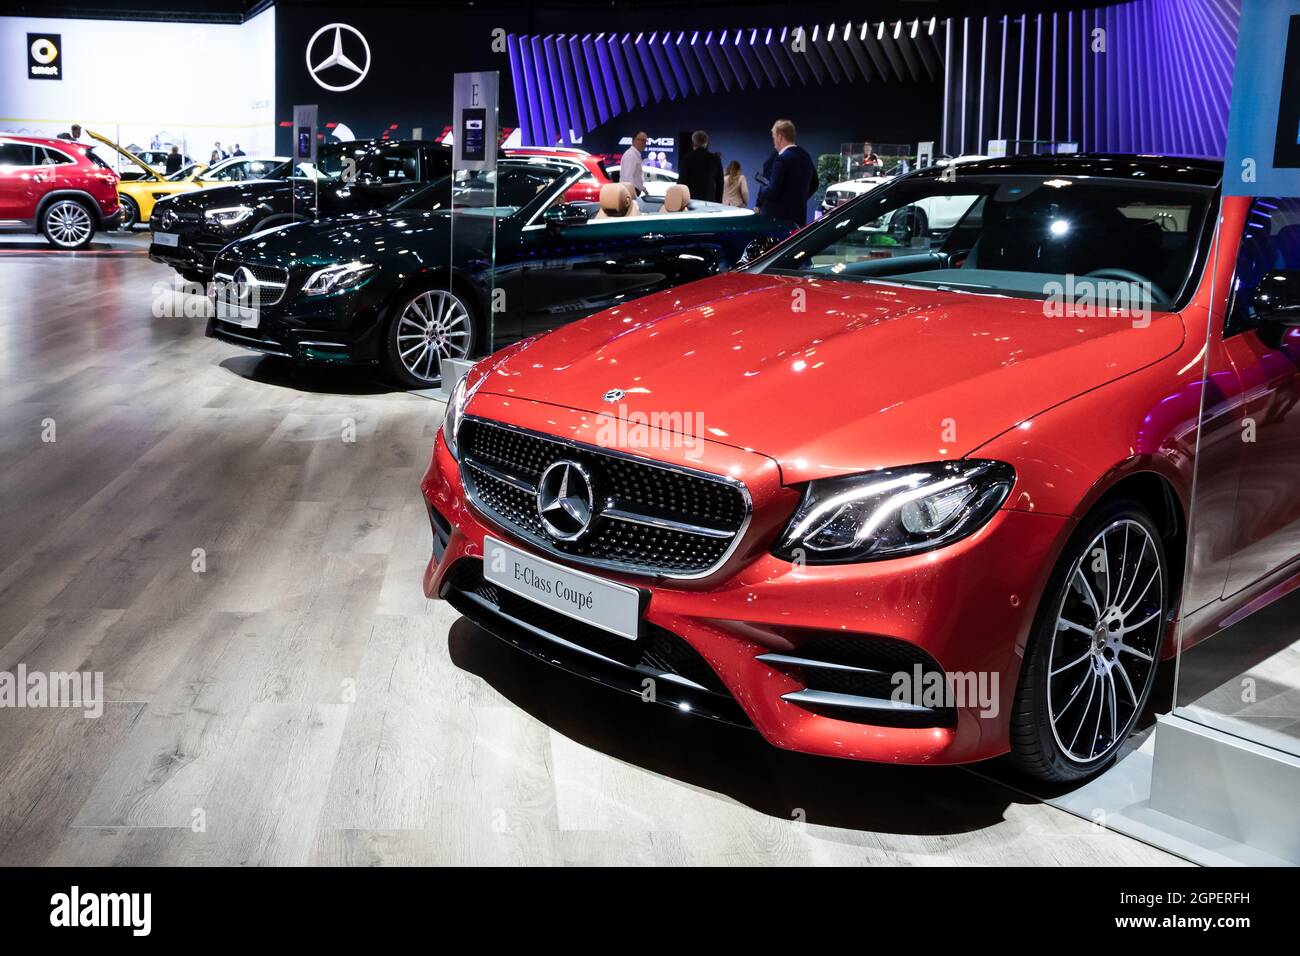 Mercedes Benz E-Class Coupe car model shown at the Autosalon 2020 Motor Show. Brussels, Belgium - January 9, 2020. Stock Photo